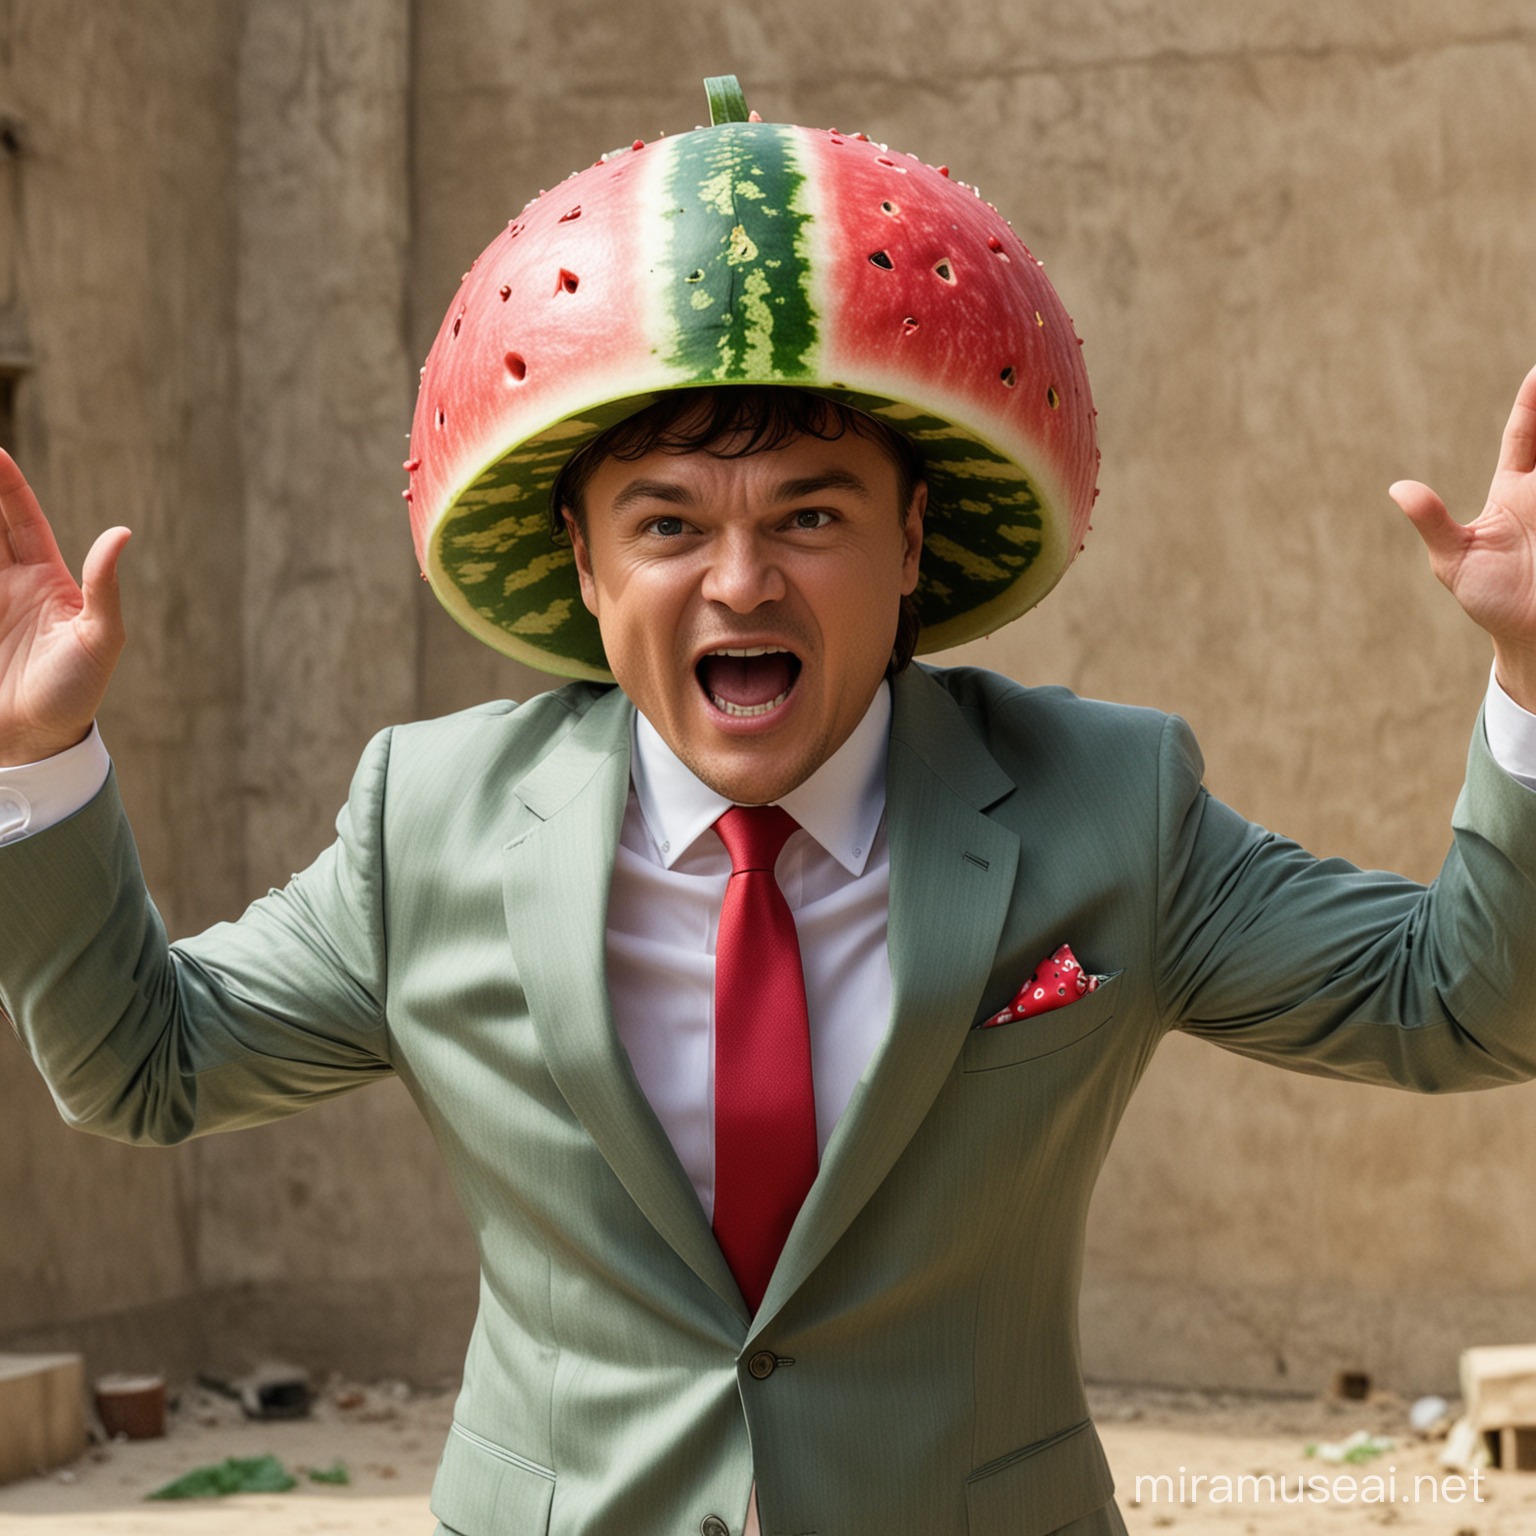 Leonardo decaprio wearing a watermelon helmet. He is wearing a suit with his arms wide open